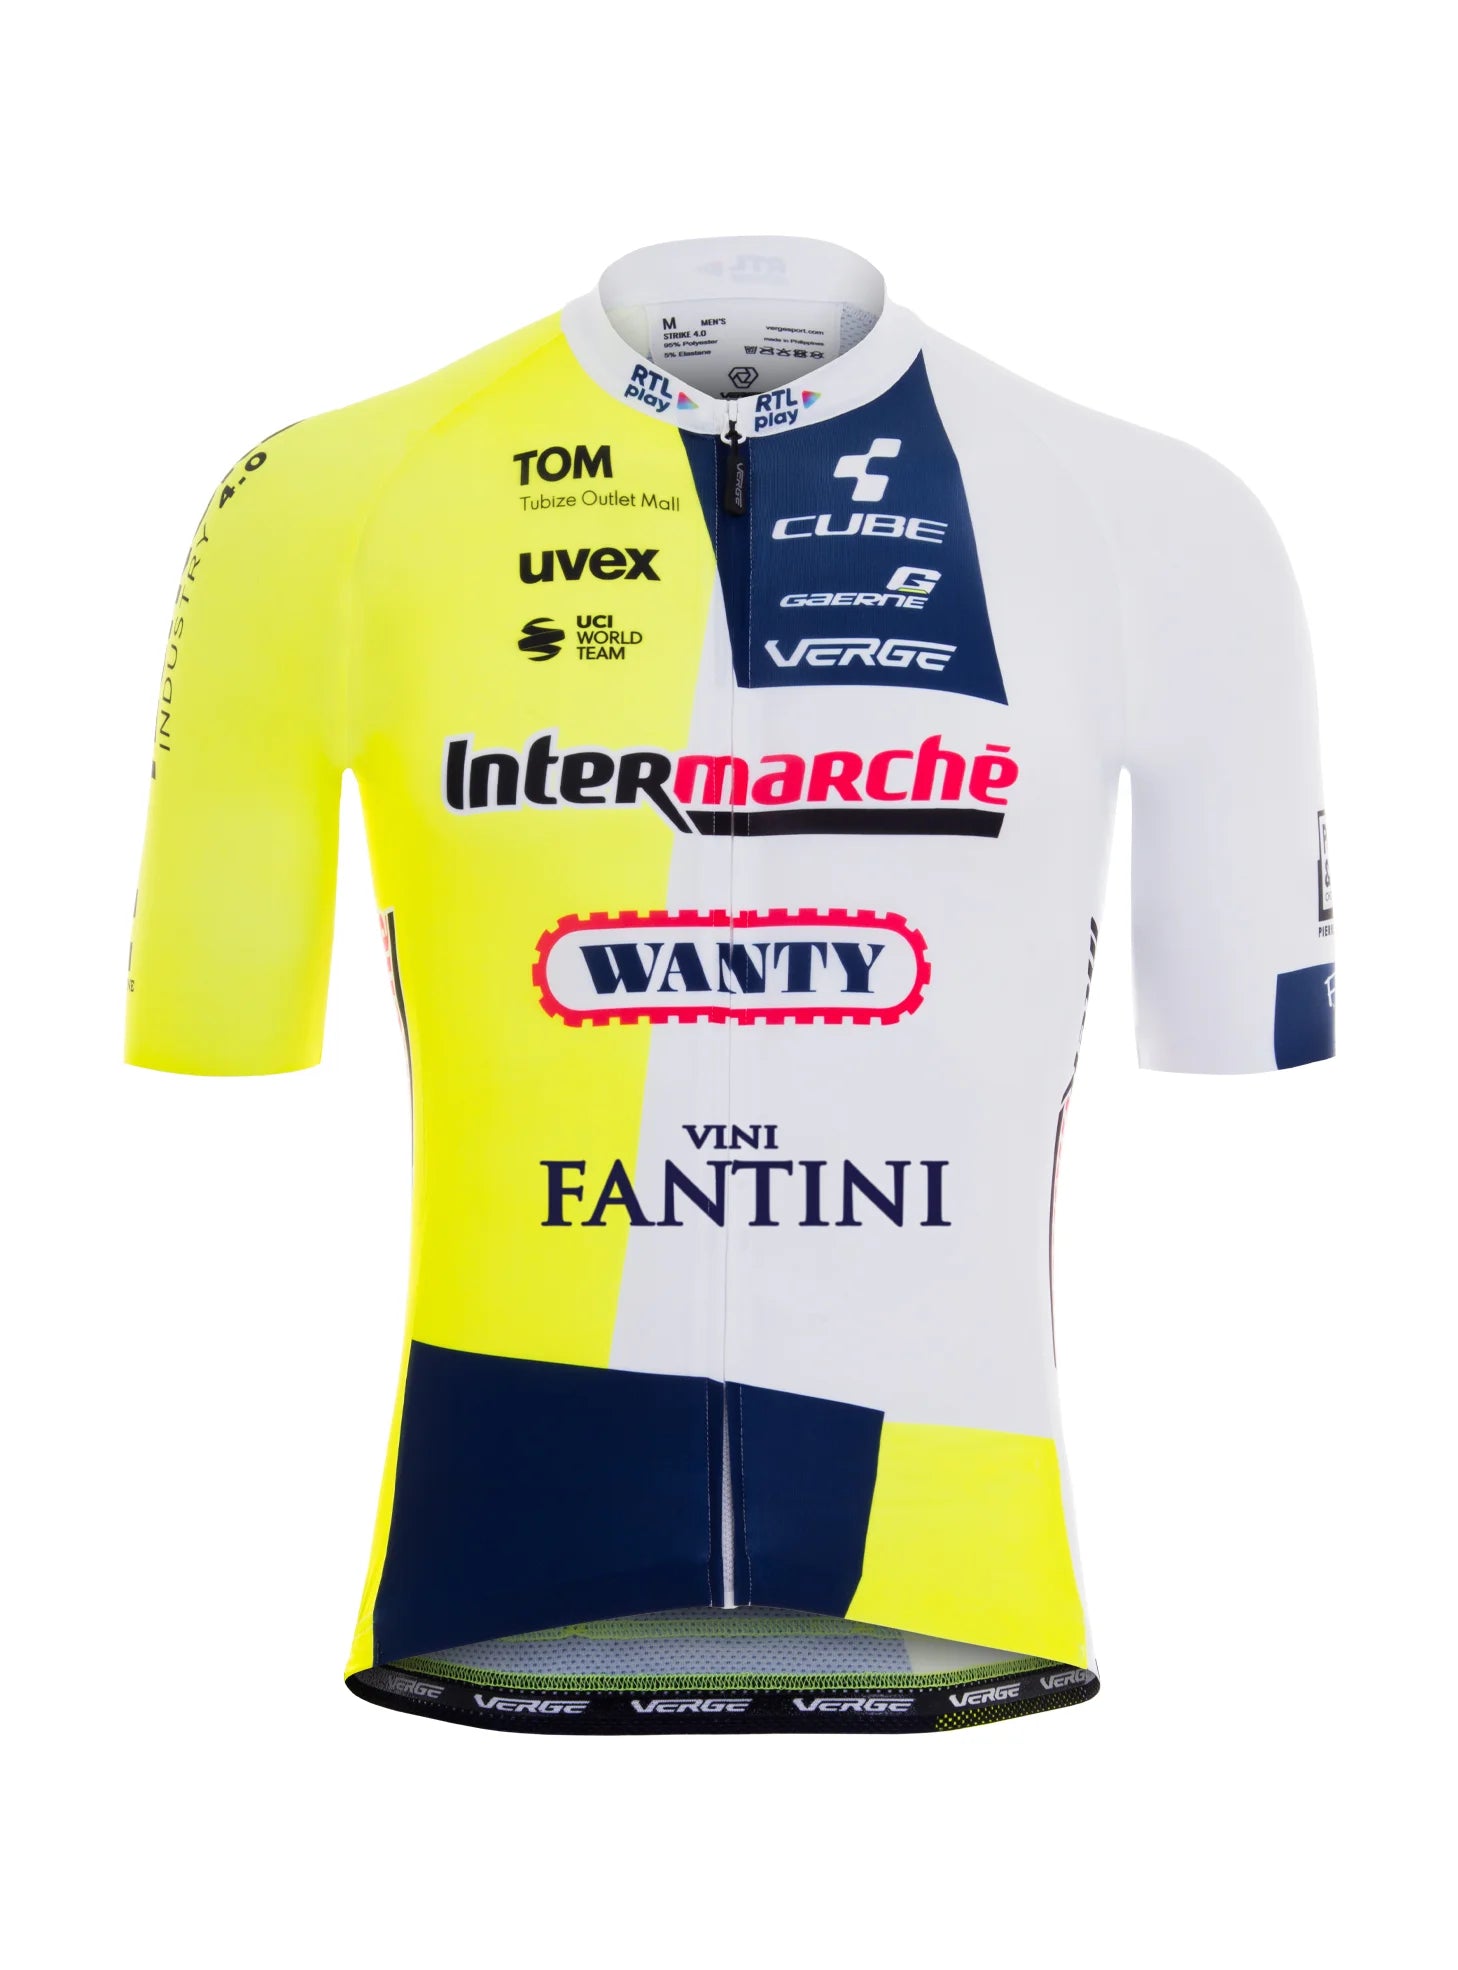 INTERMARCHÉ-WANTY OFFICIAL TEAM STRIKE 4.0 JERSEY